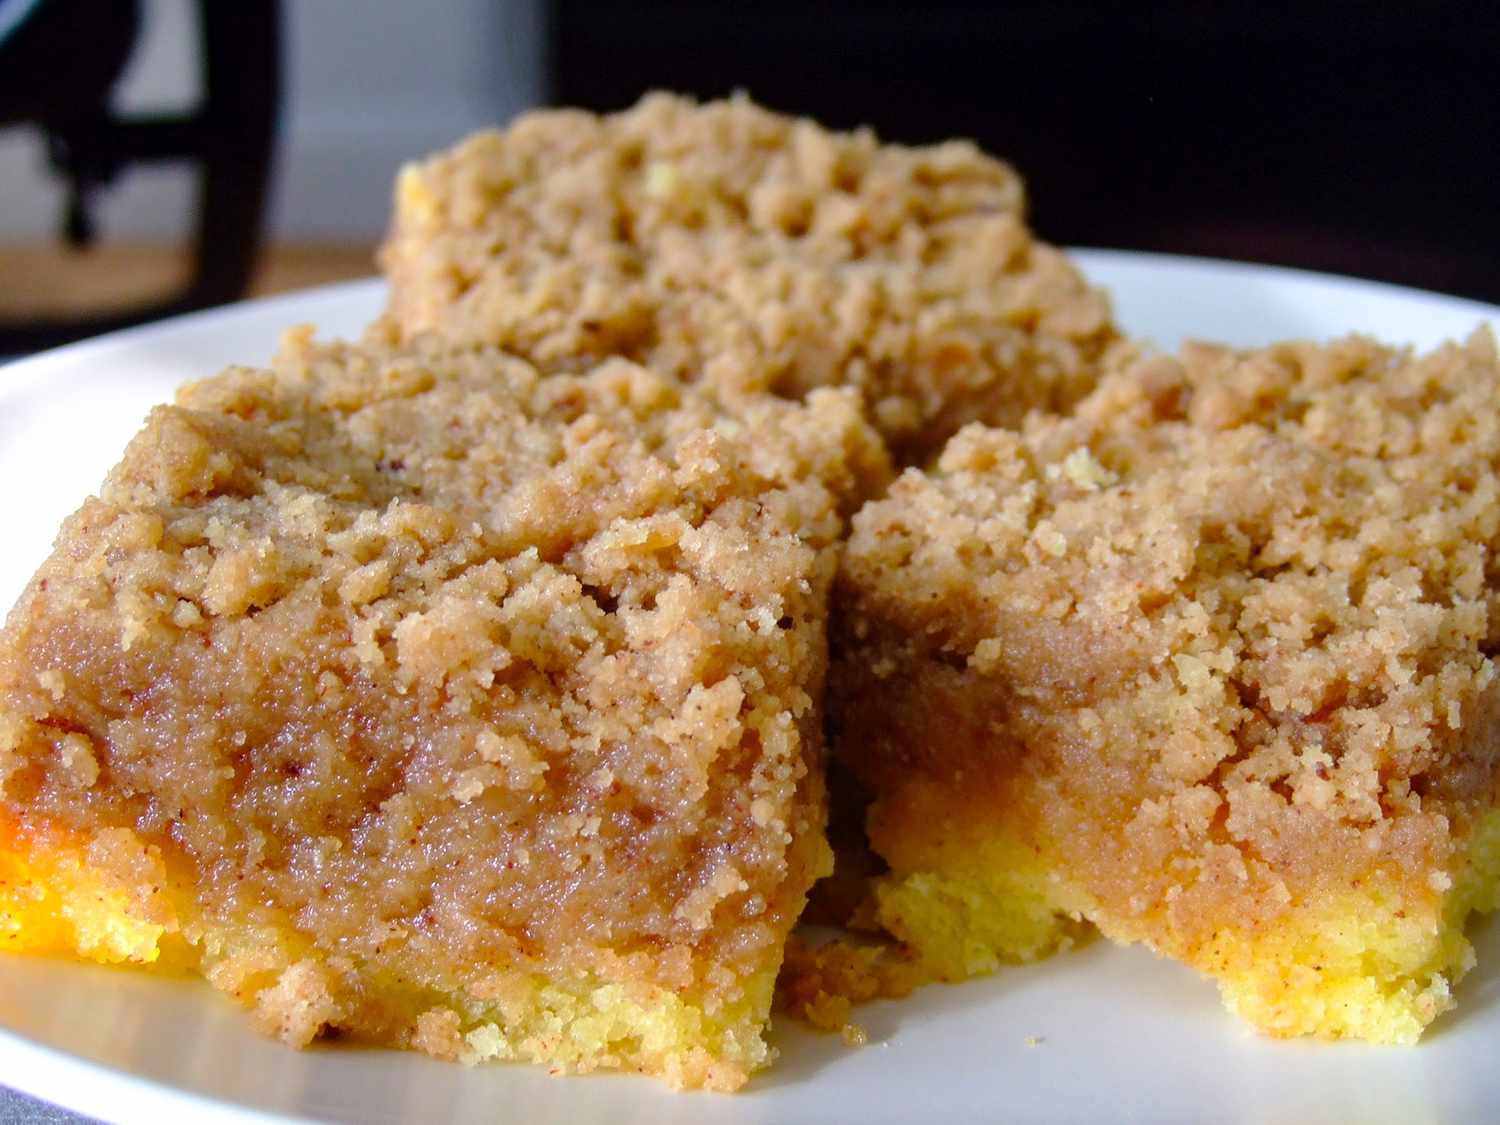 401804-outrageously-buttery-crumb-cake-rgilmore212-4x3-1-7b9a2b5937d649648f8fd04be0763d59.jpg